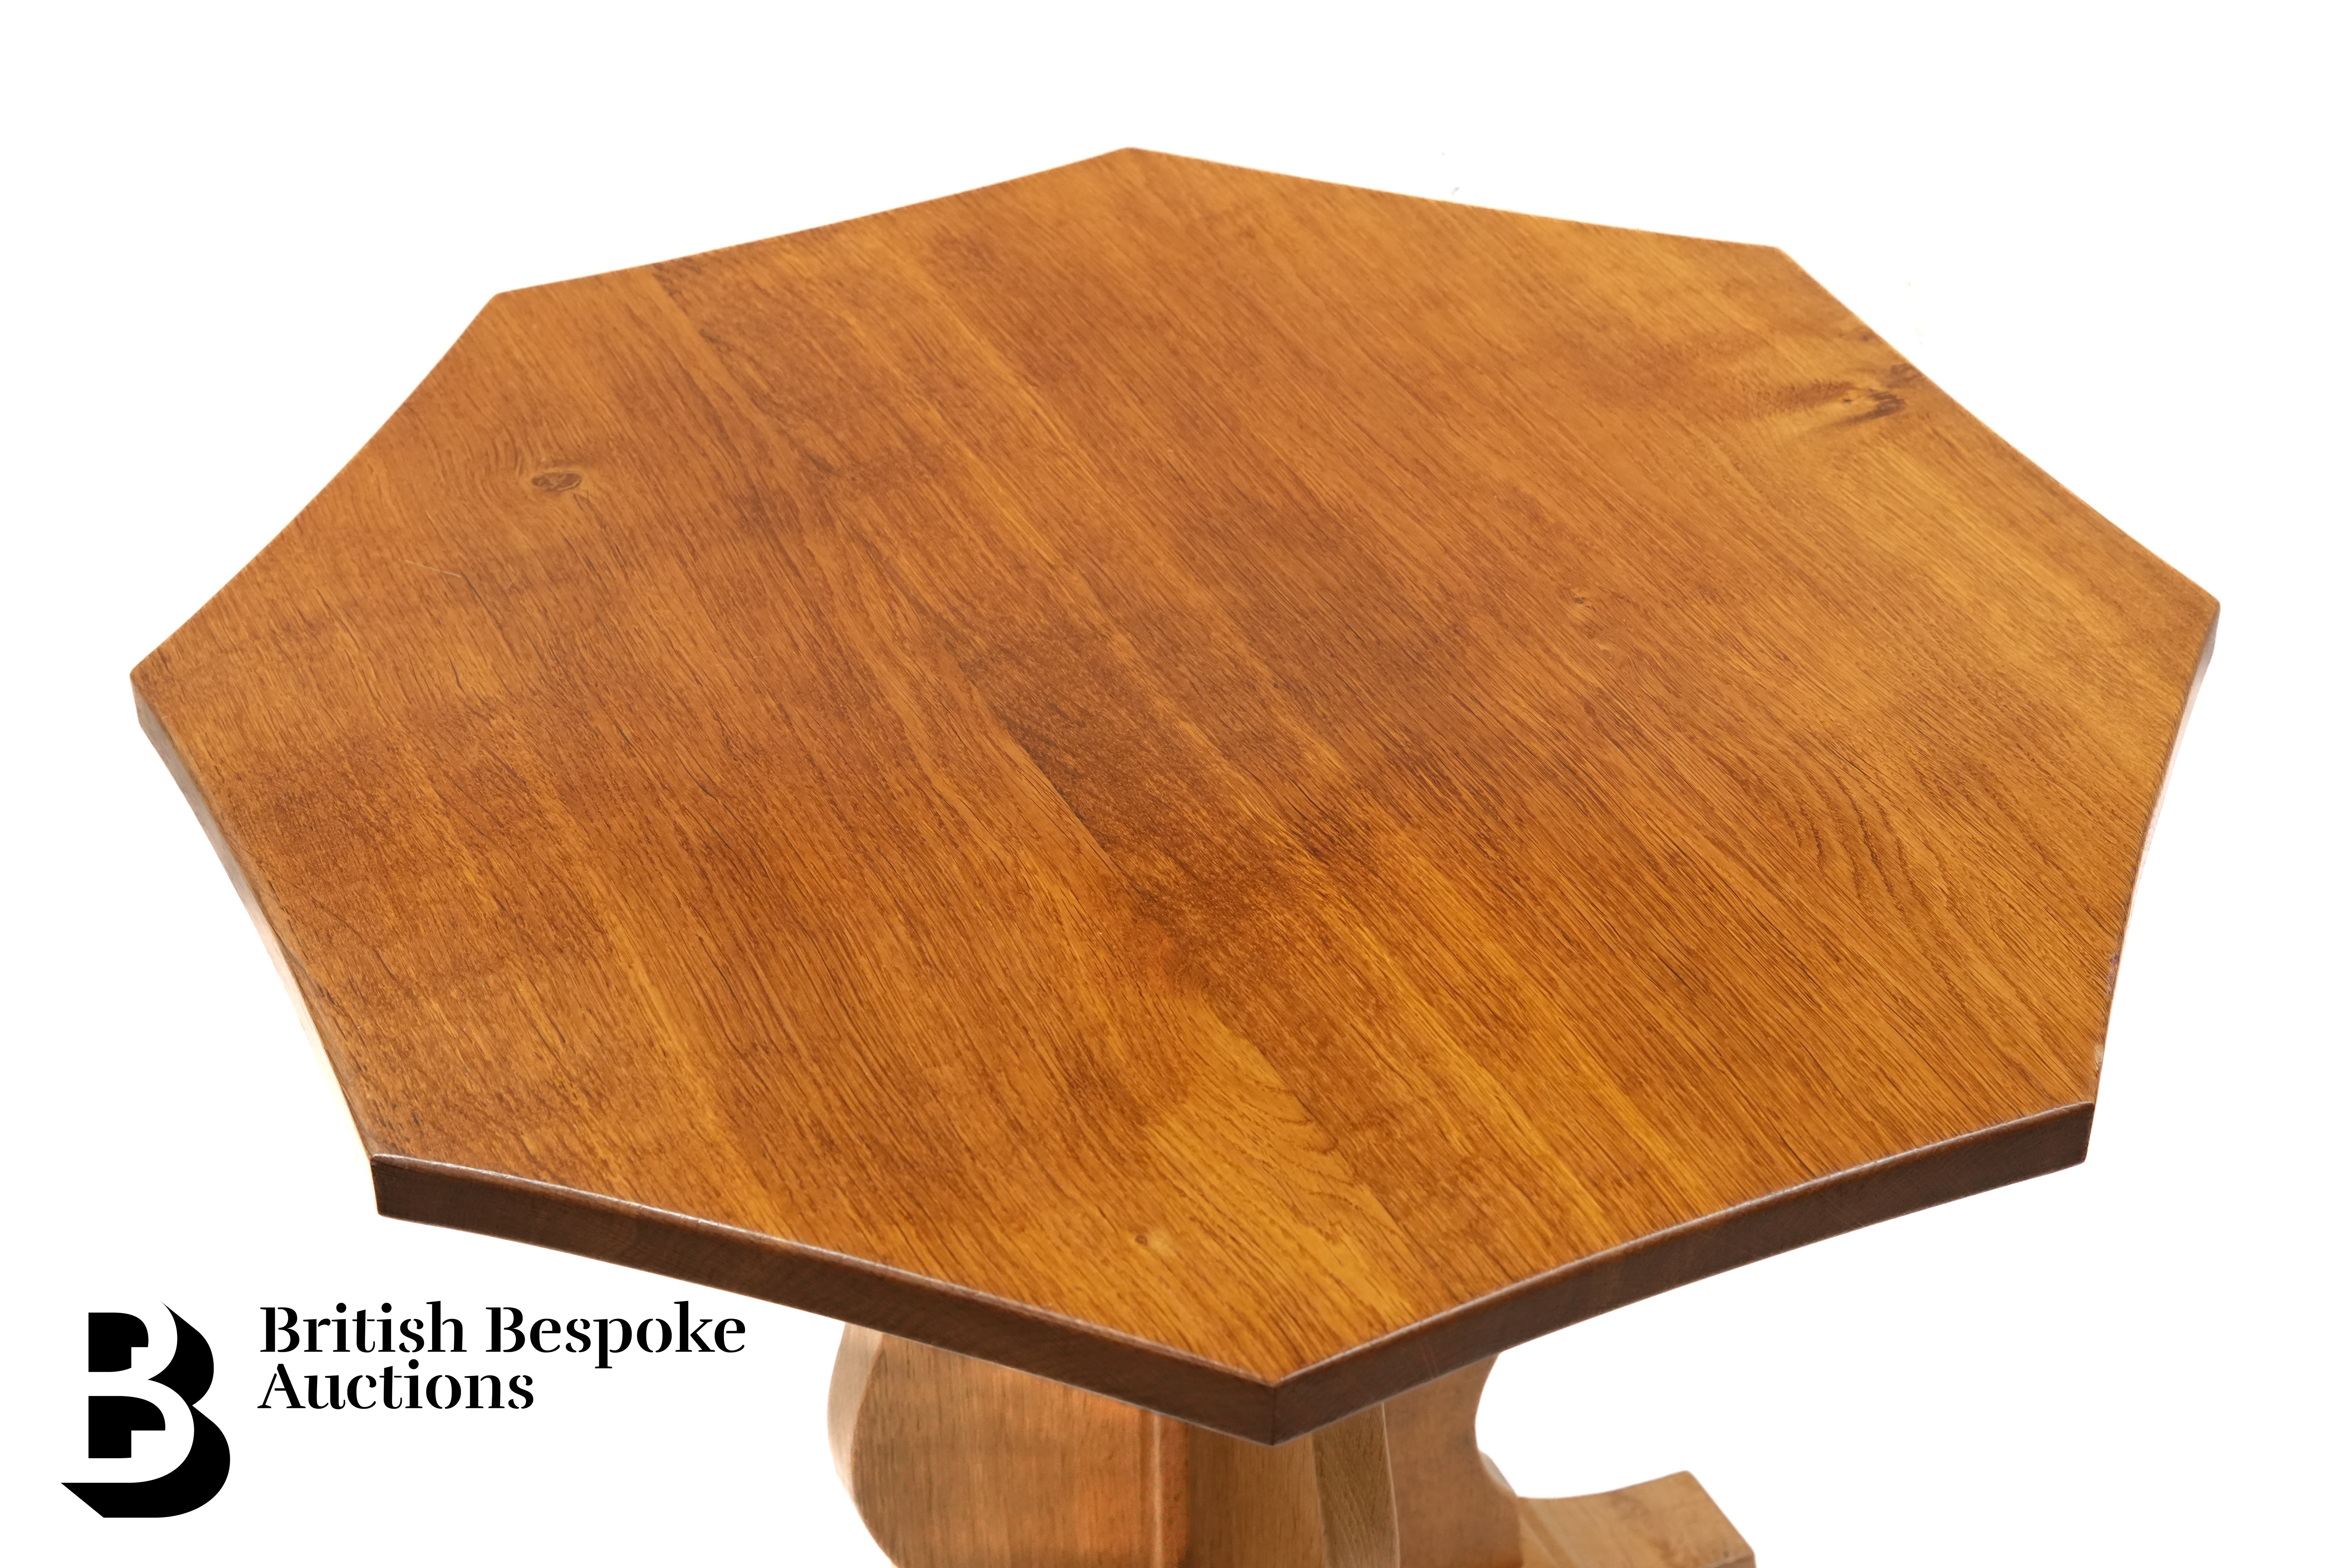 Colin Beaverman Almack Octagonal Occasional Table - Image 2 of 6